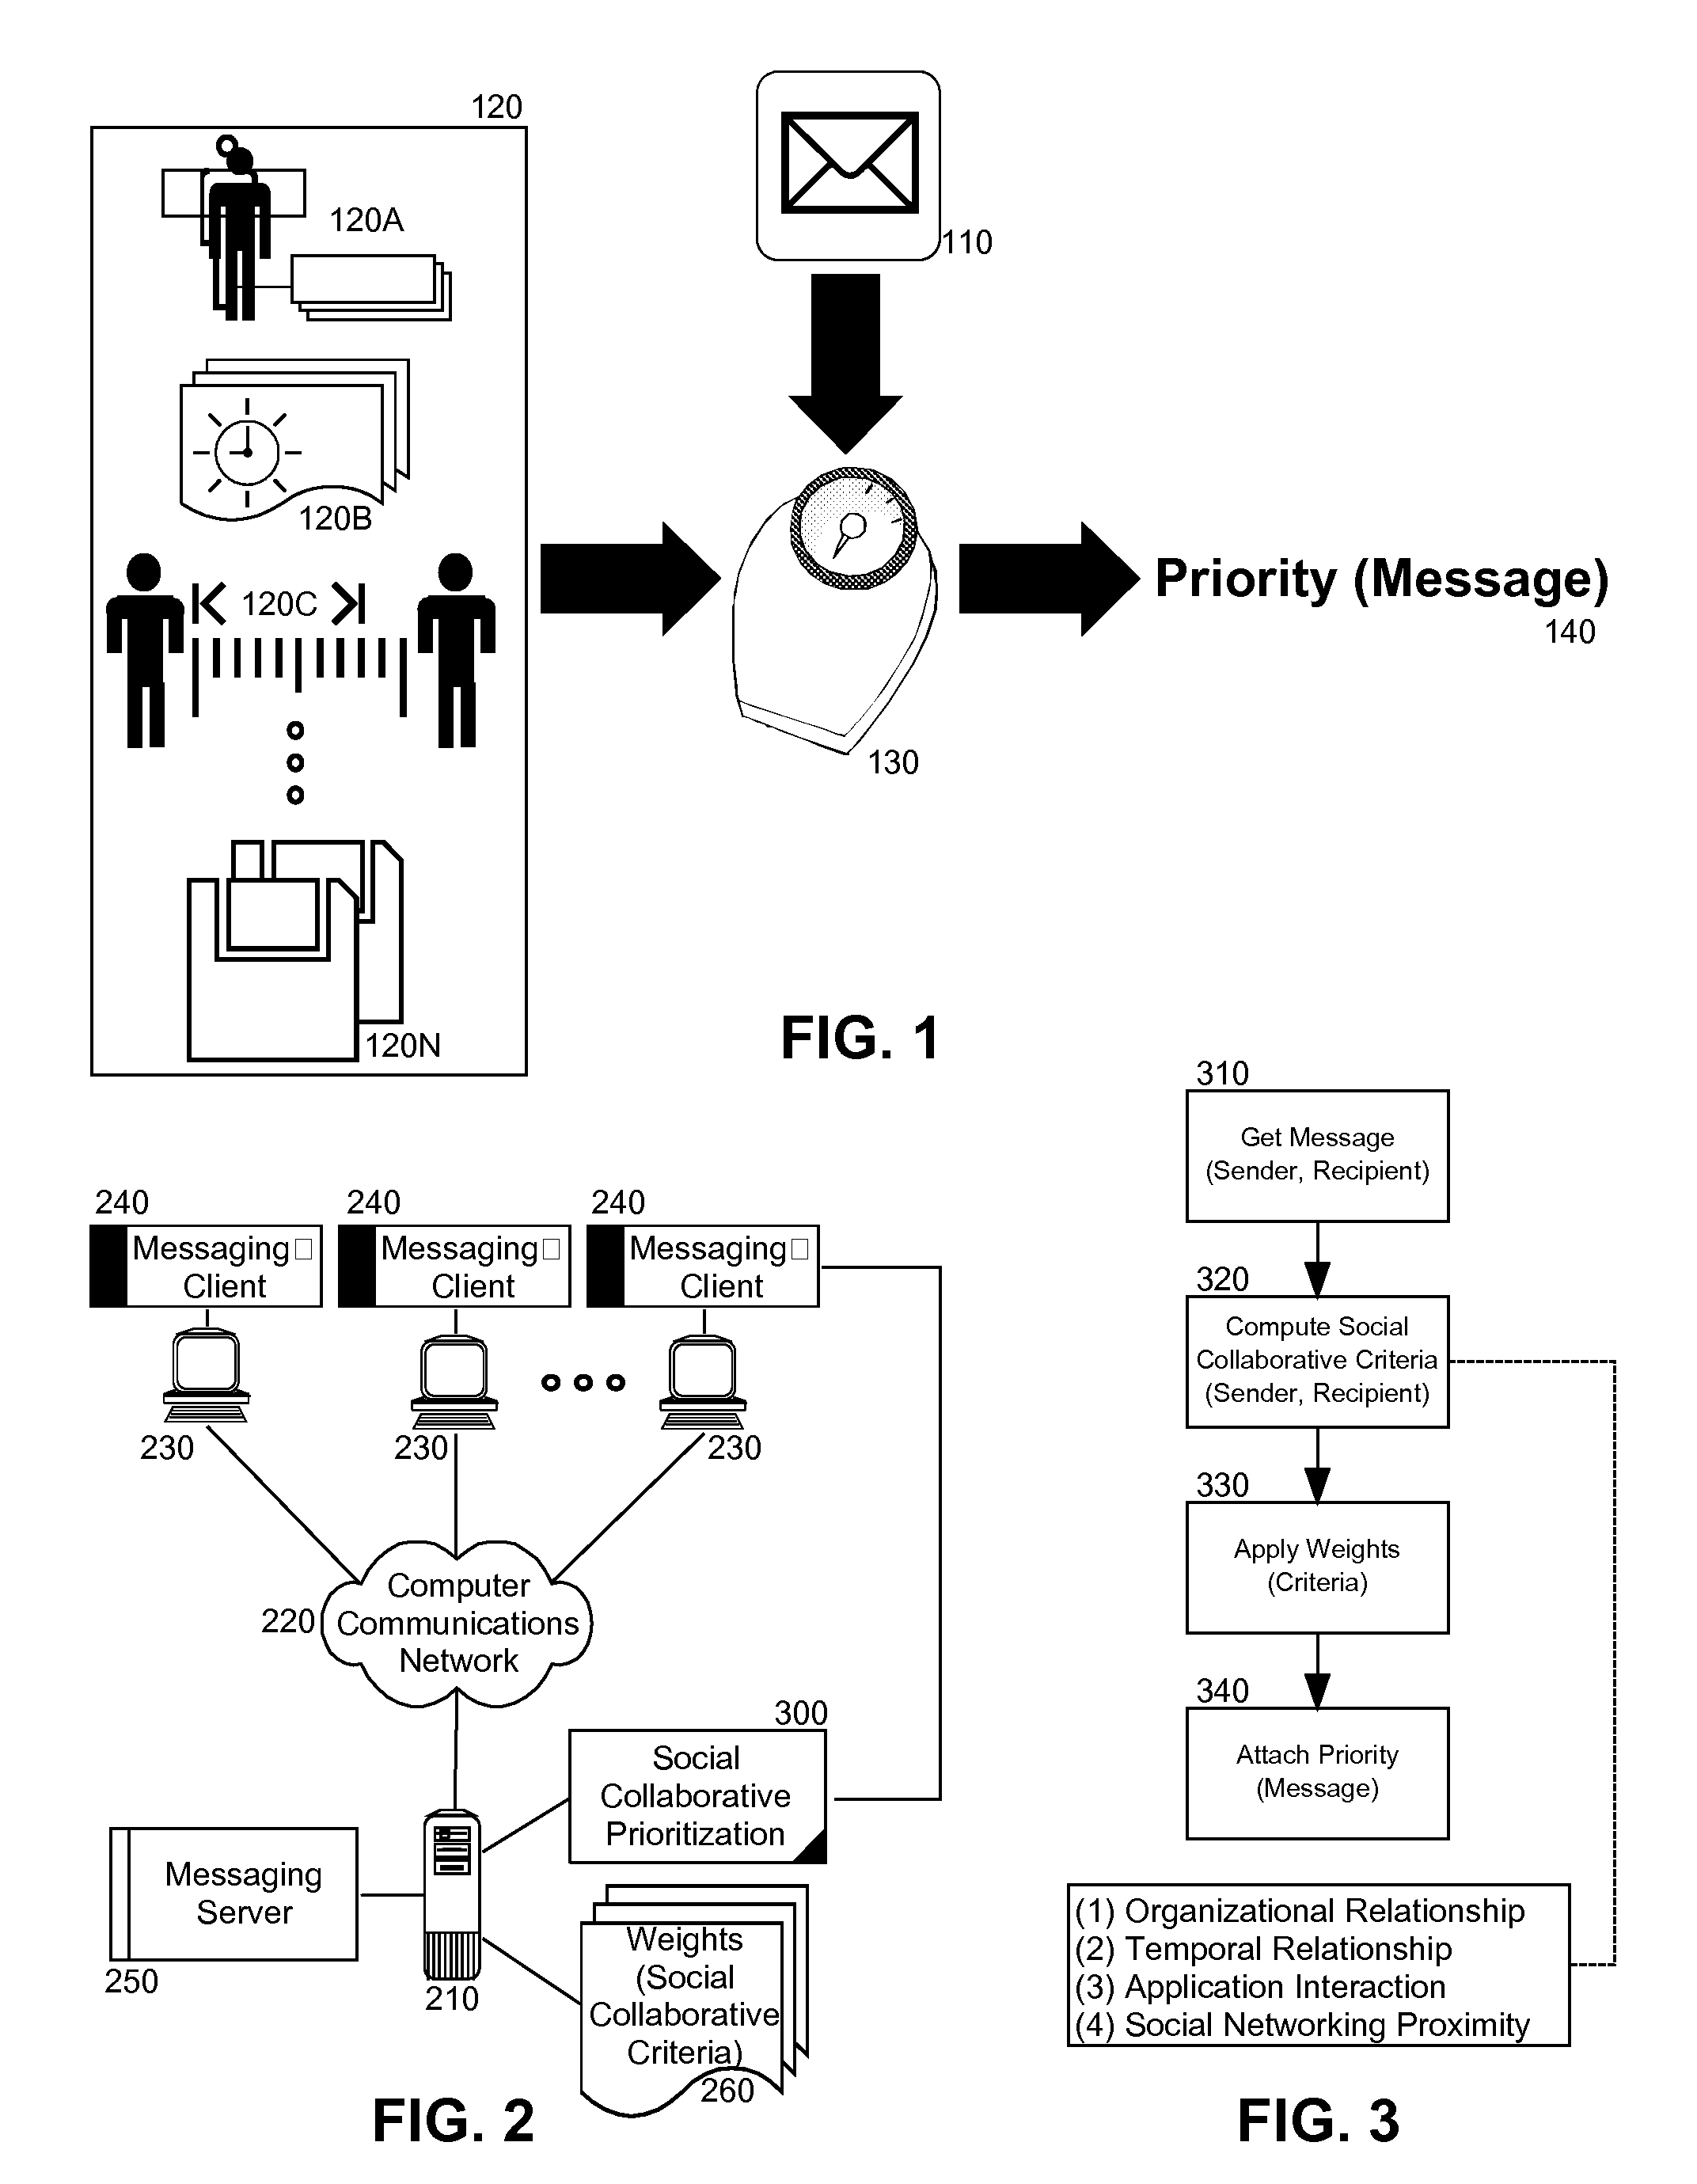 Social collaborative scoring for message prioritization according to an application interaction relationship between sender and recipient